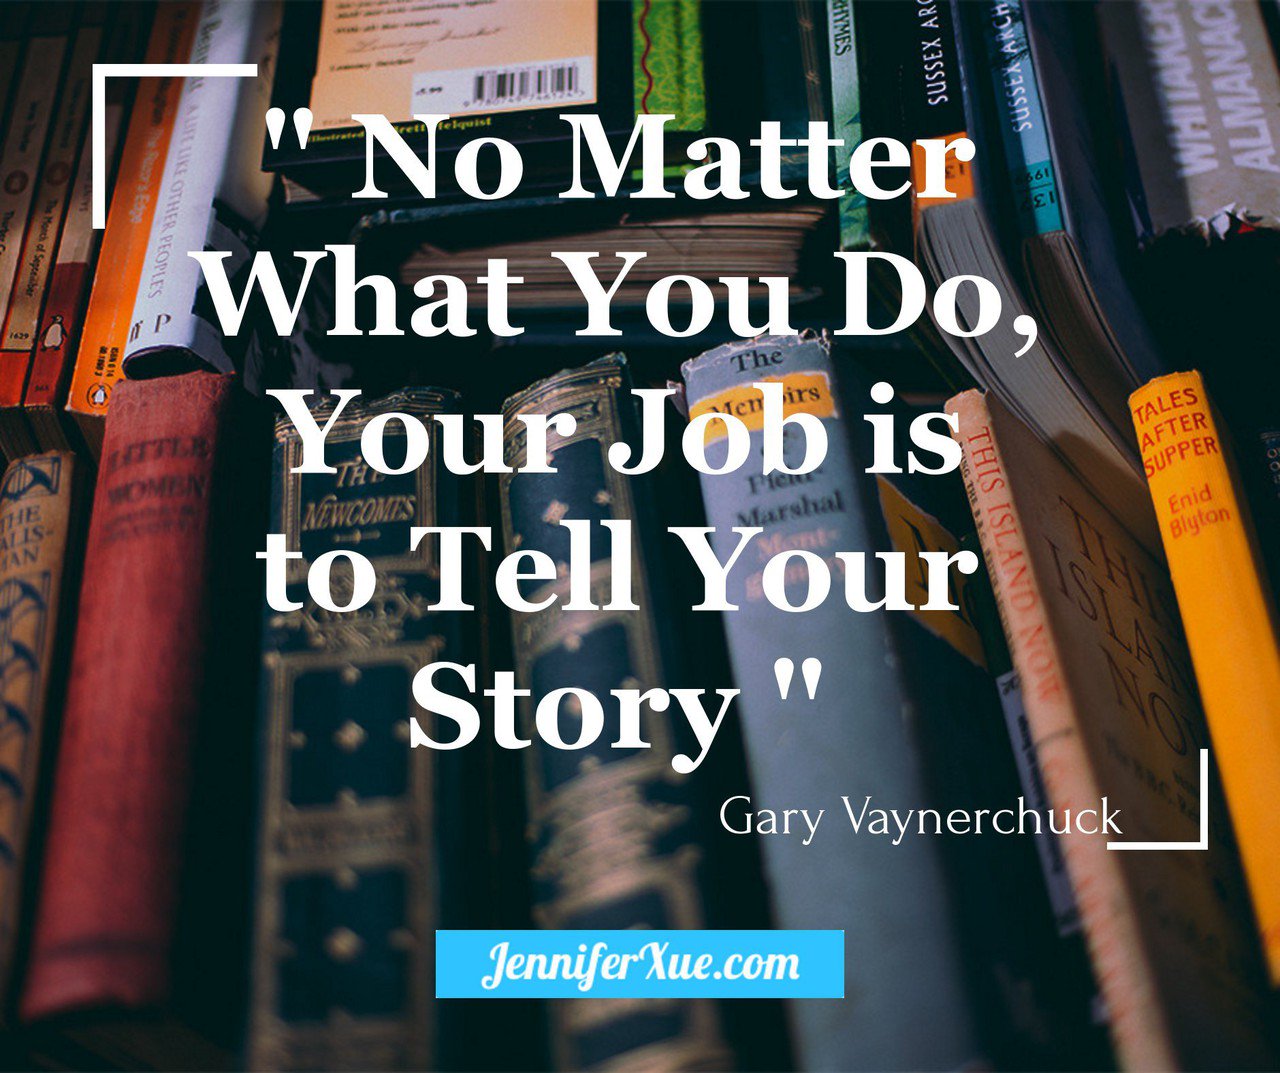 Jennifer Xue No Matter What You Do Your Job Is To Tell Your Story Gary Vaynerchuck Quote Quotes Business Storytelling Garyv Vaynerchuck T Co 869flua5w4 Twitter